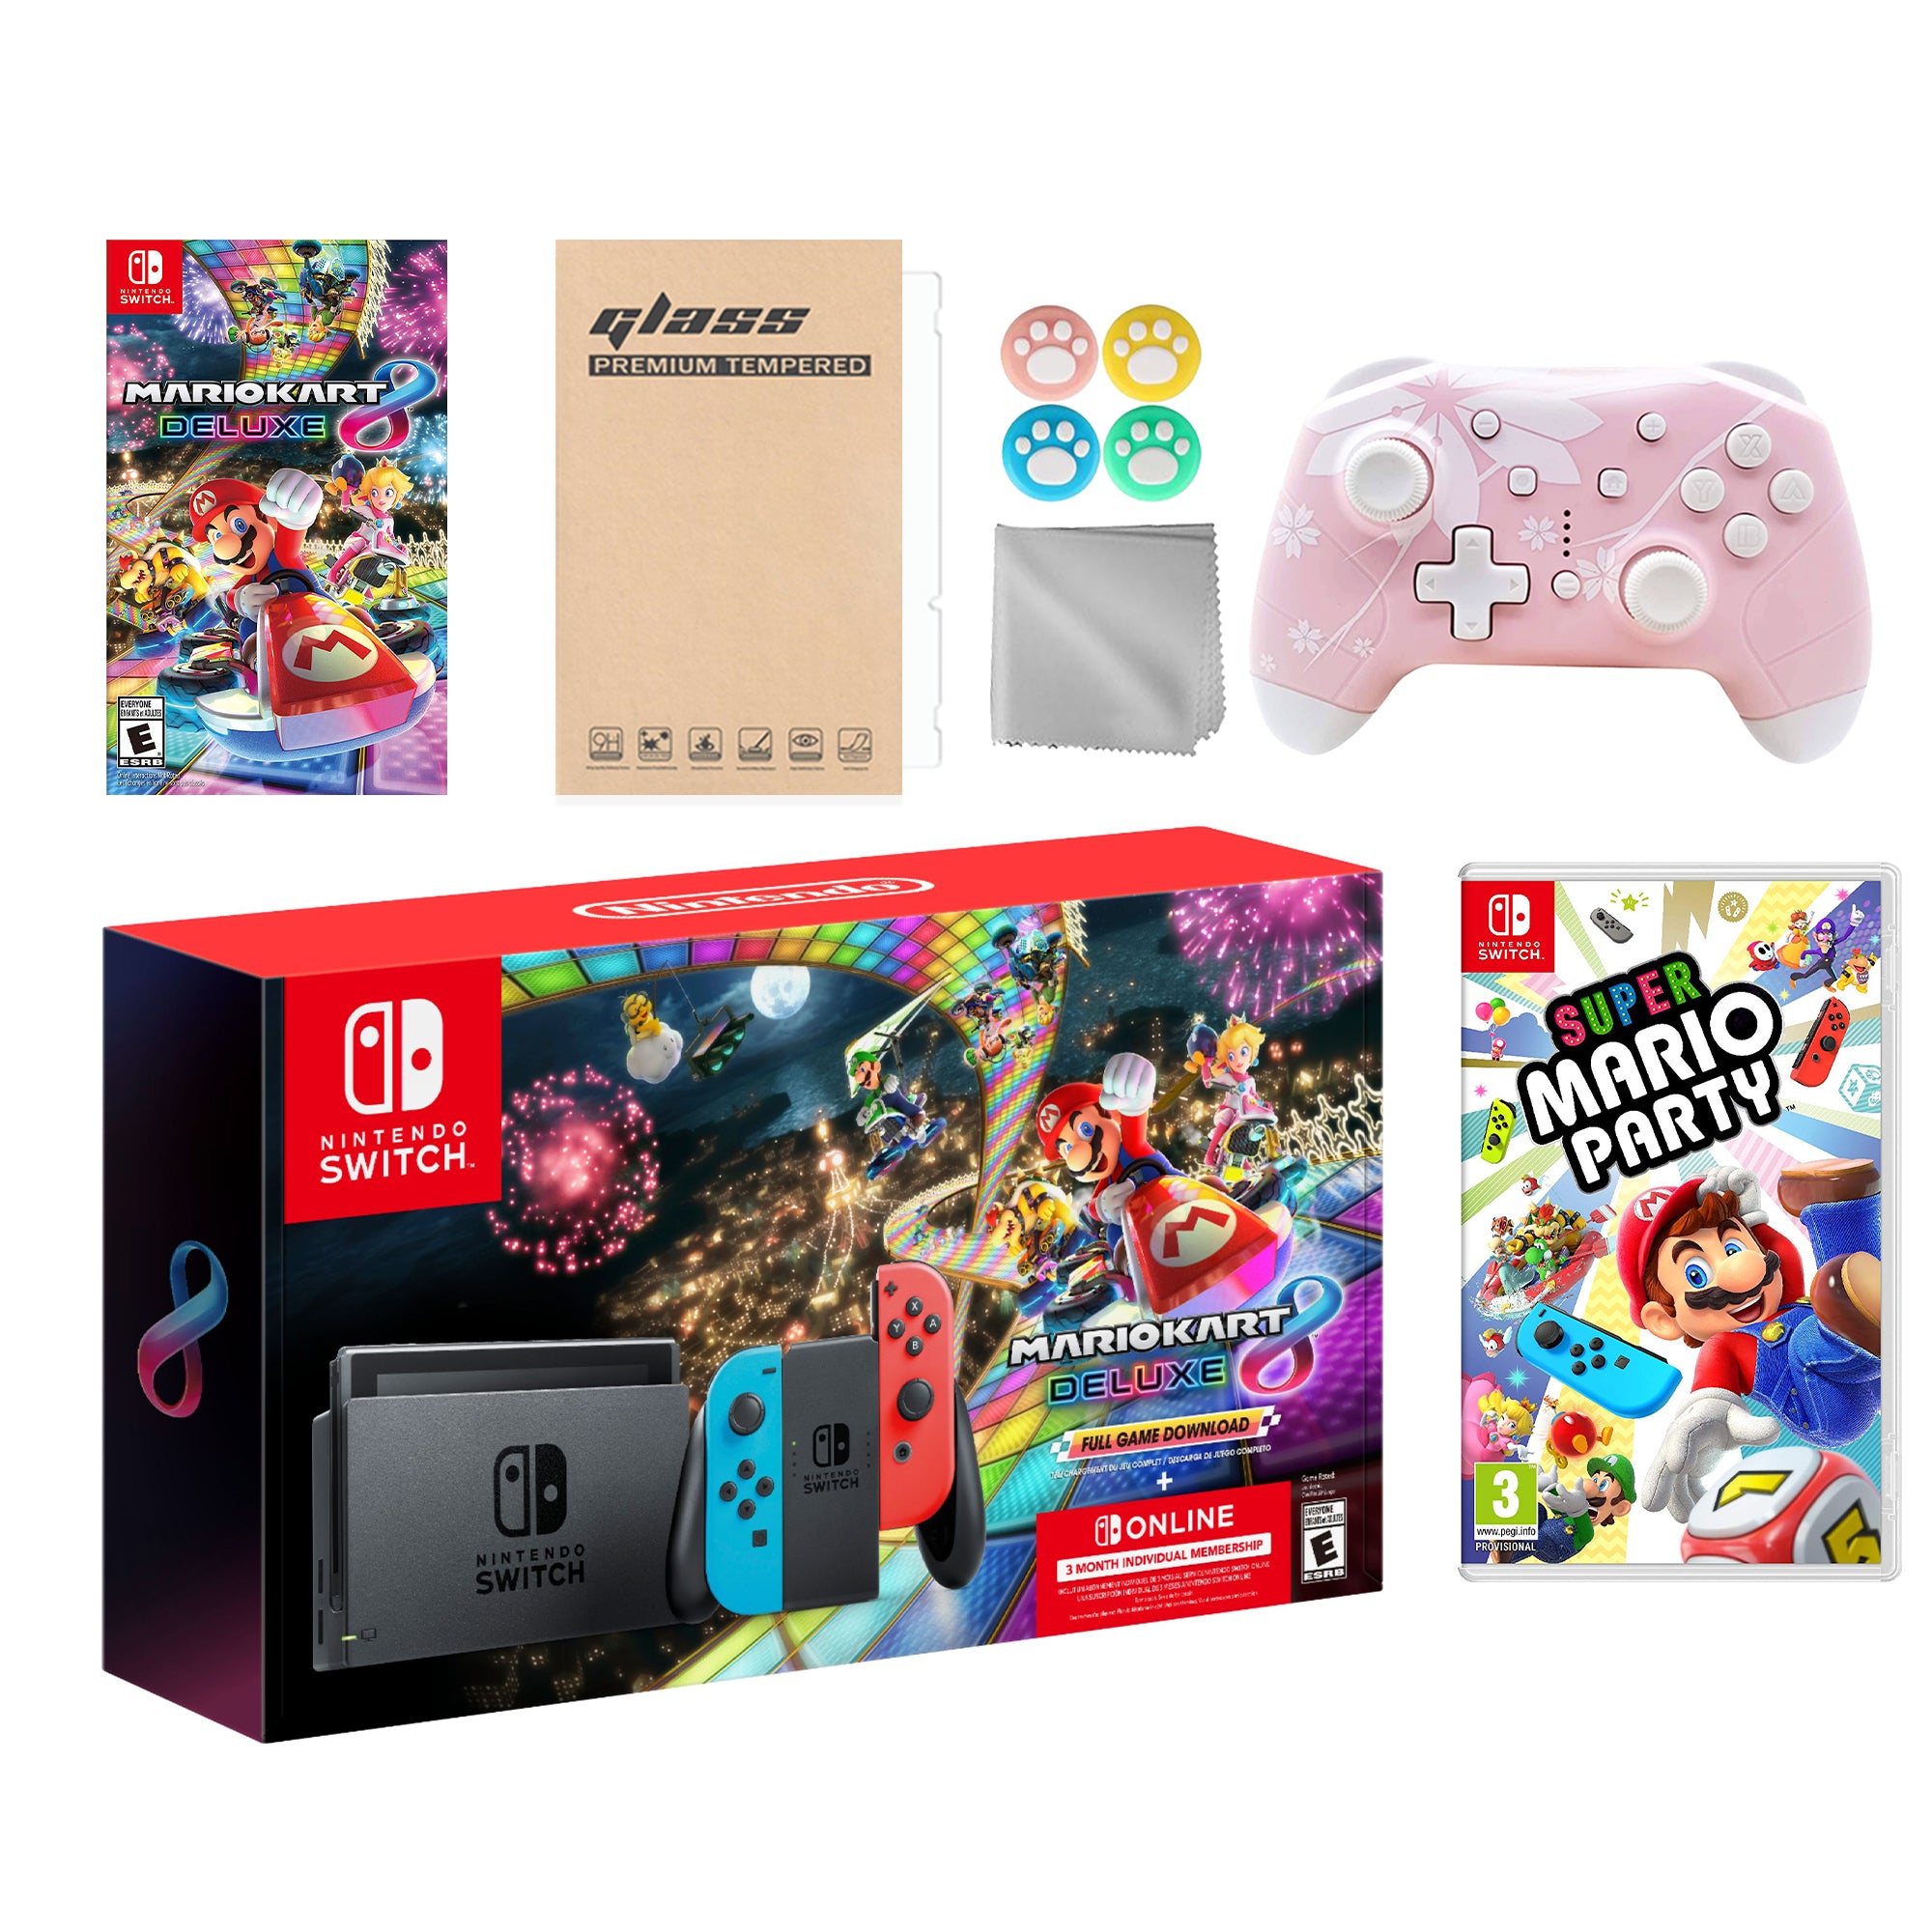 Nintendo Switch Mario Kart 8 Deluxe Bundle: Red Blue Console, Mario Kart 8 & Membership, Super Mario Party, Mytrix Wireless Pro Controller Pink Cherry Blossom and Accessories